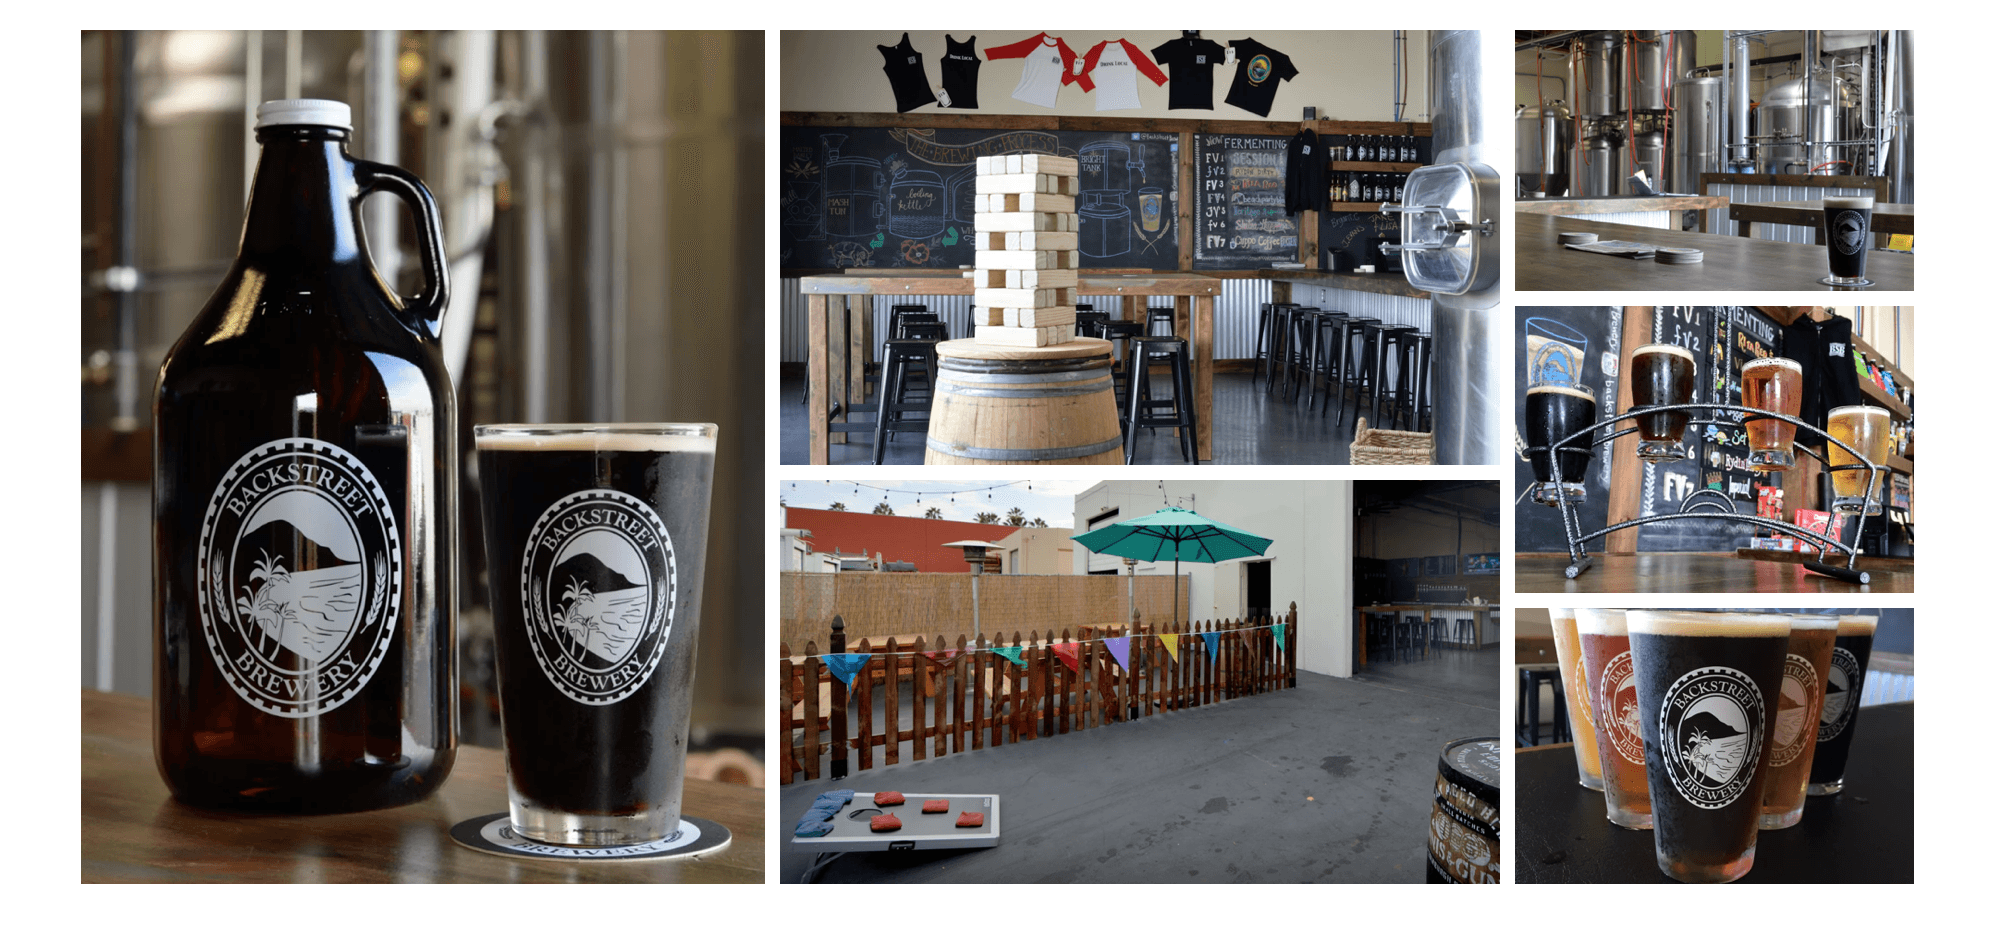 Image collage of the Backstreet Brewery in Irvine and glasses of Draft Beers